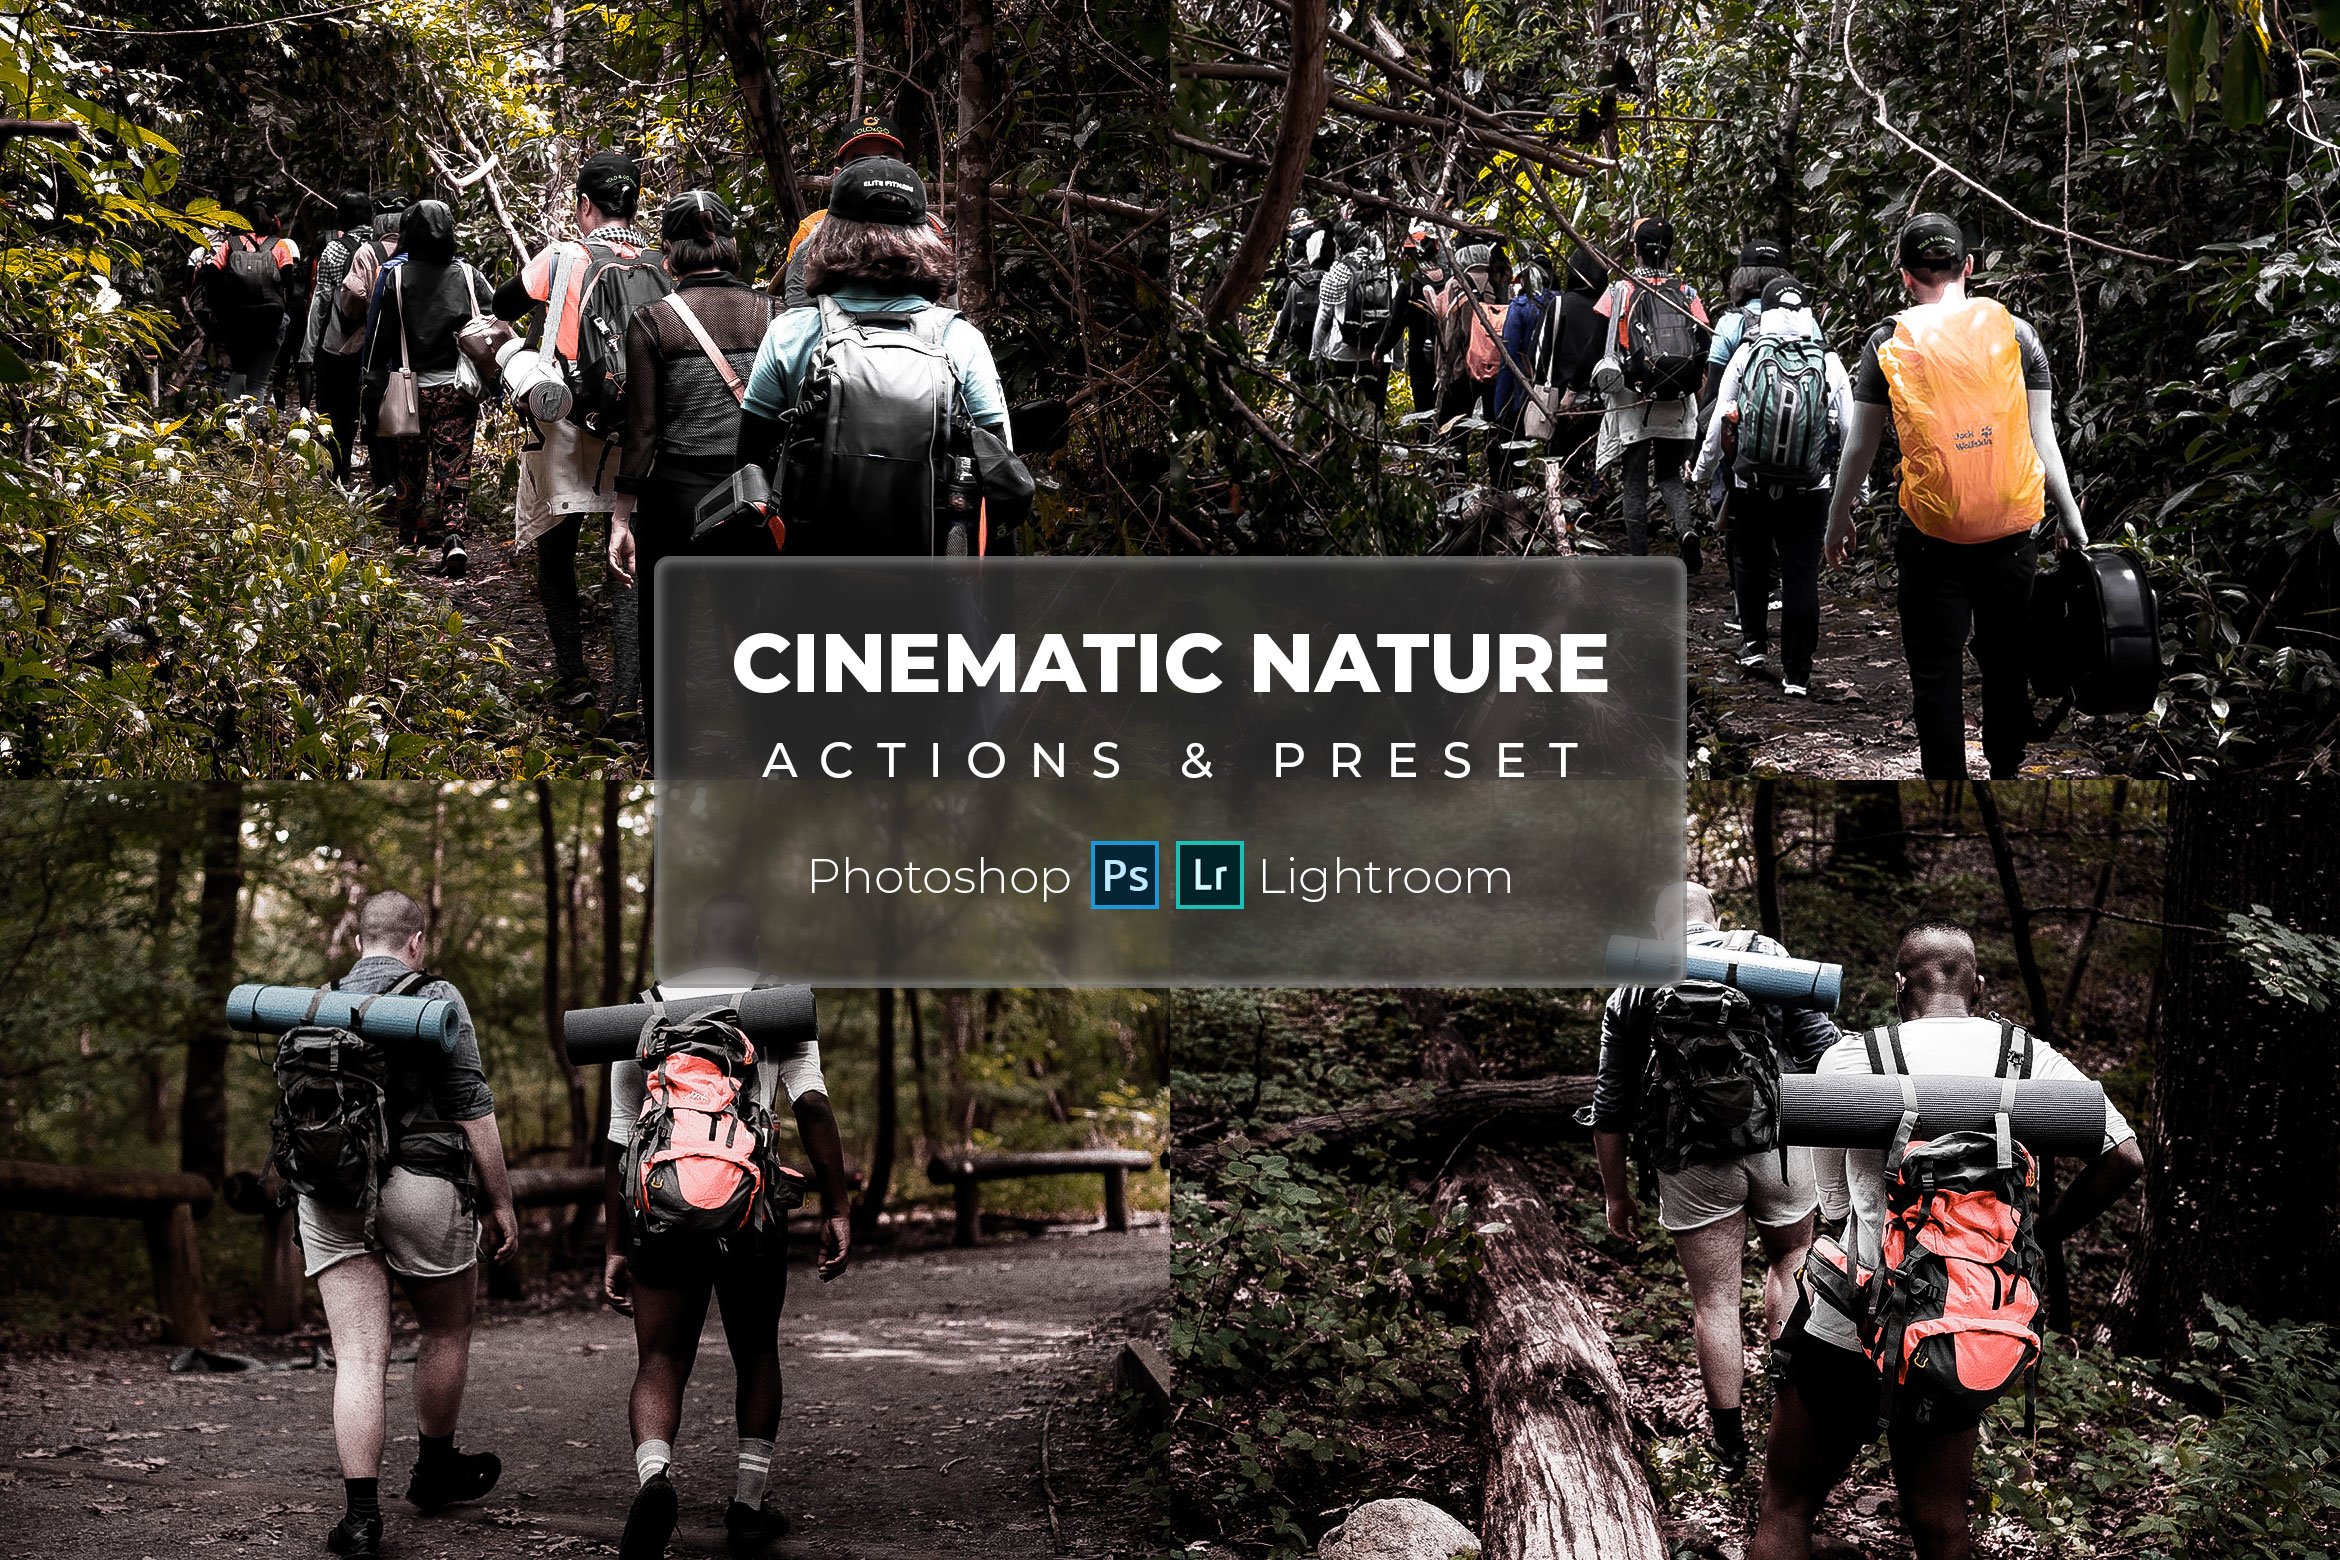 Natural Cinematic - Presets & Actioncover image.